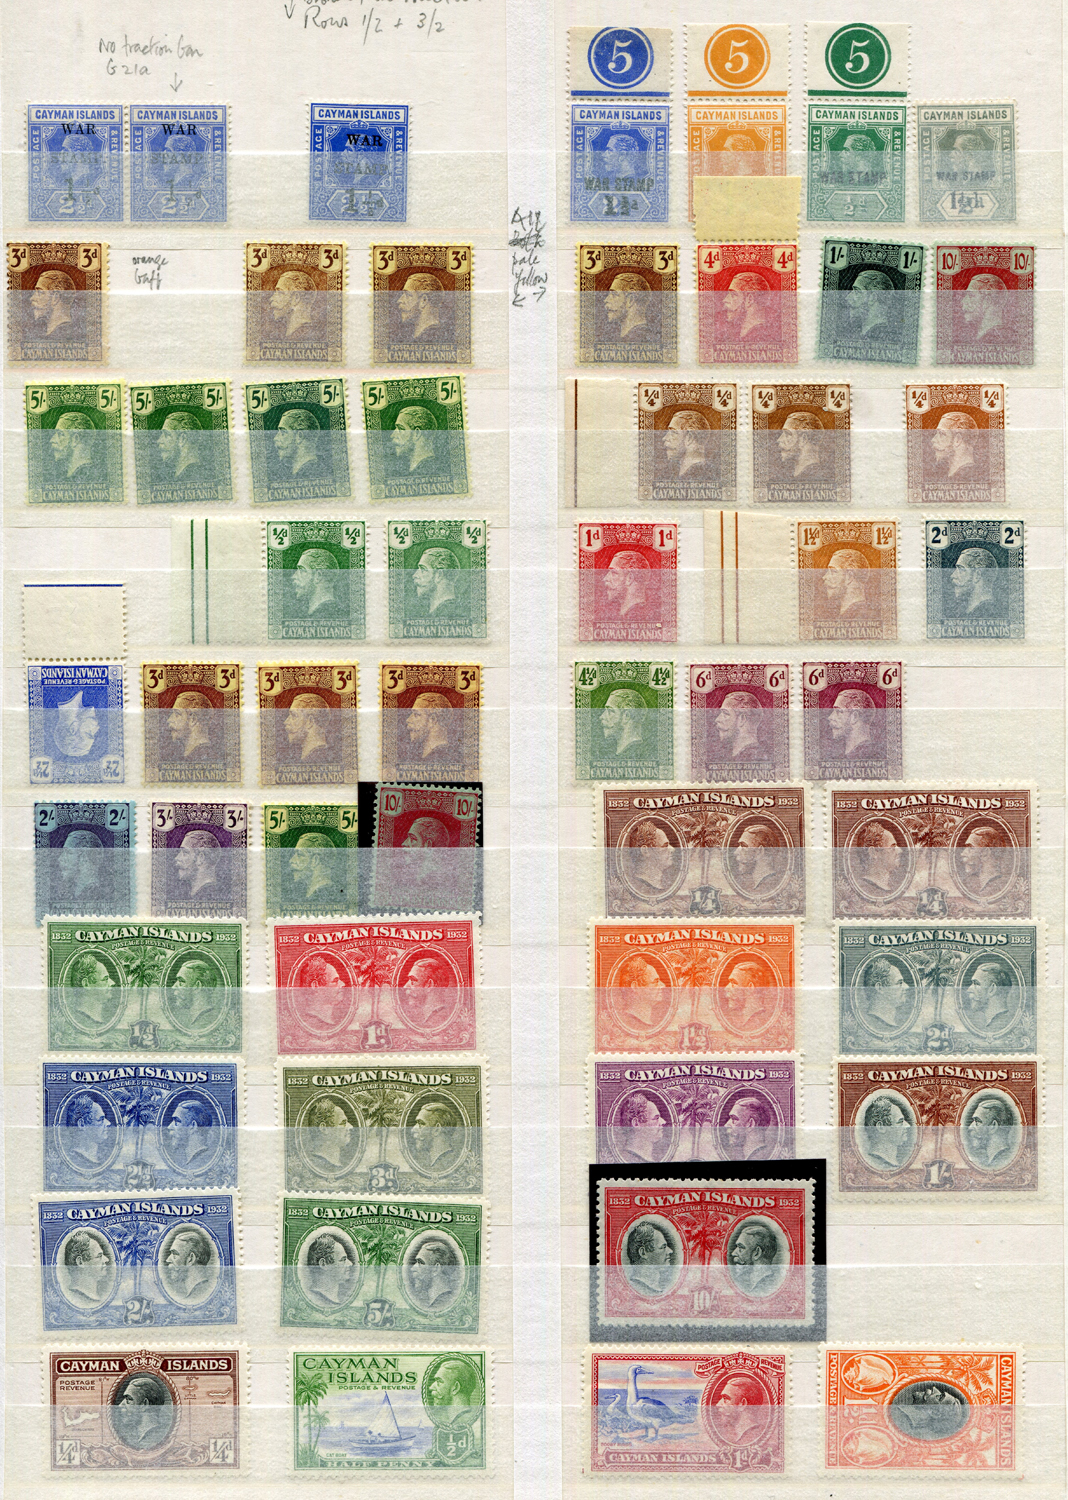 Cayman Islands mint stamp collection in stock book with 1907 to 5 shillings, 1907 ½d on 5 - Image 3 of 4